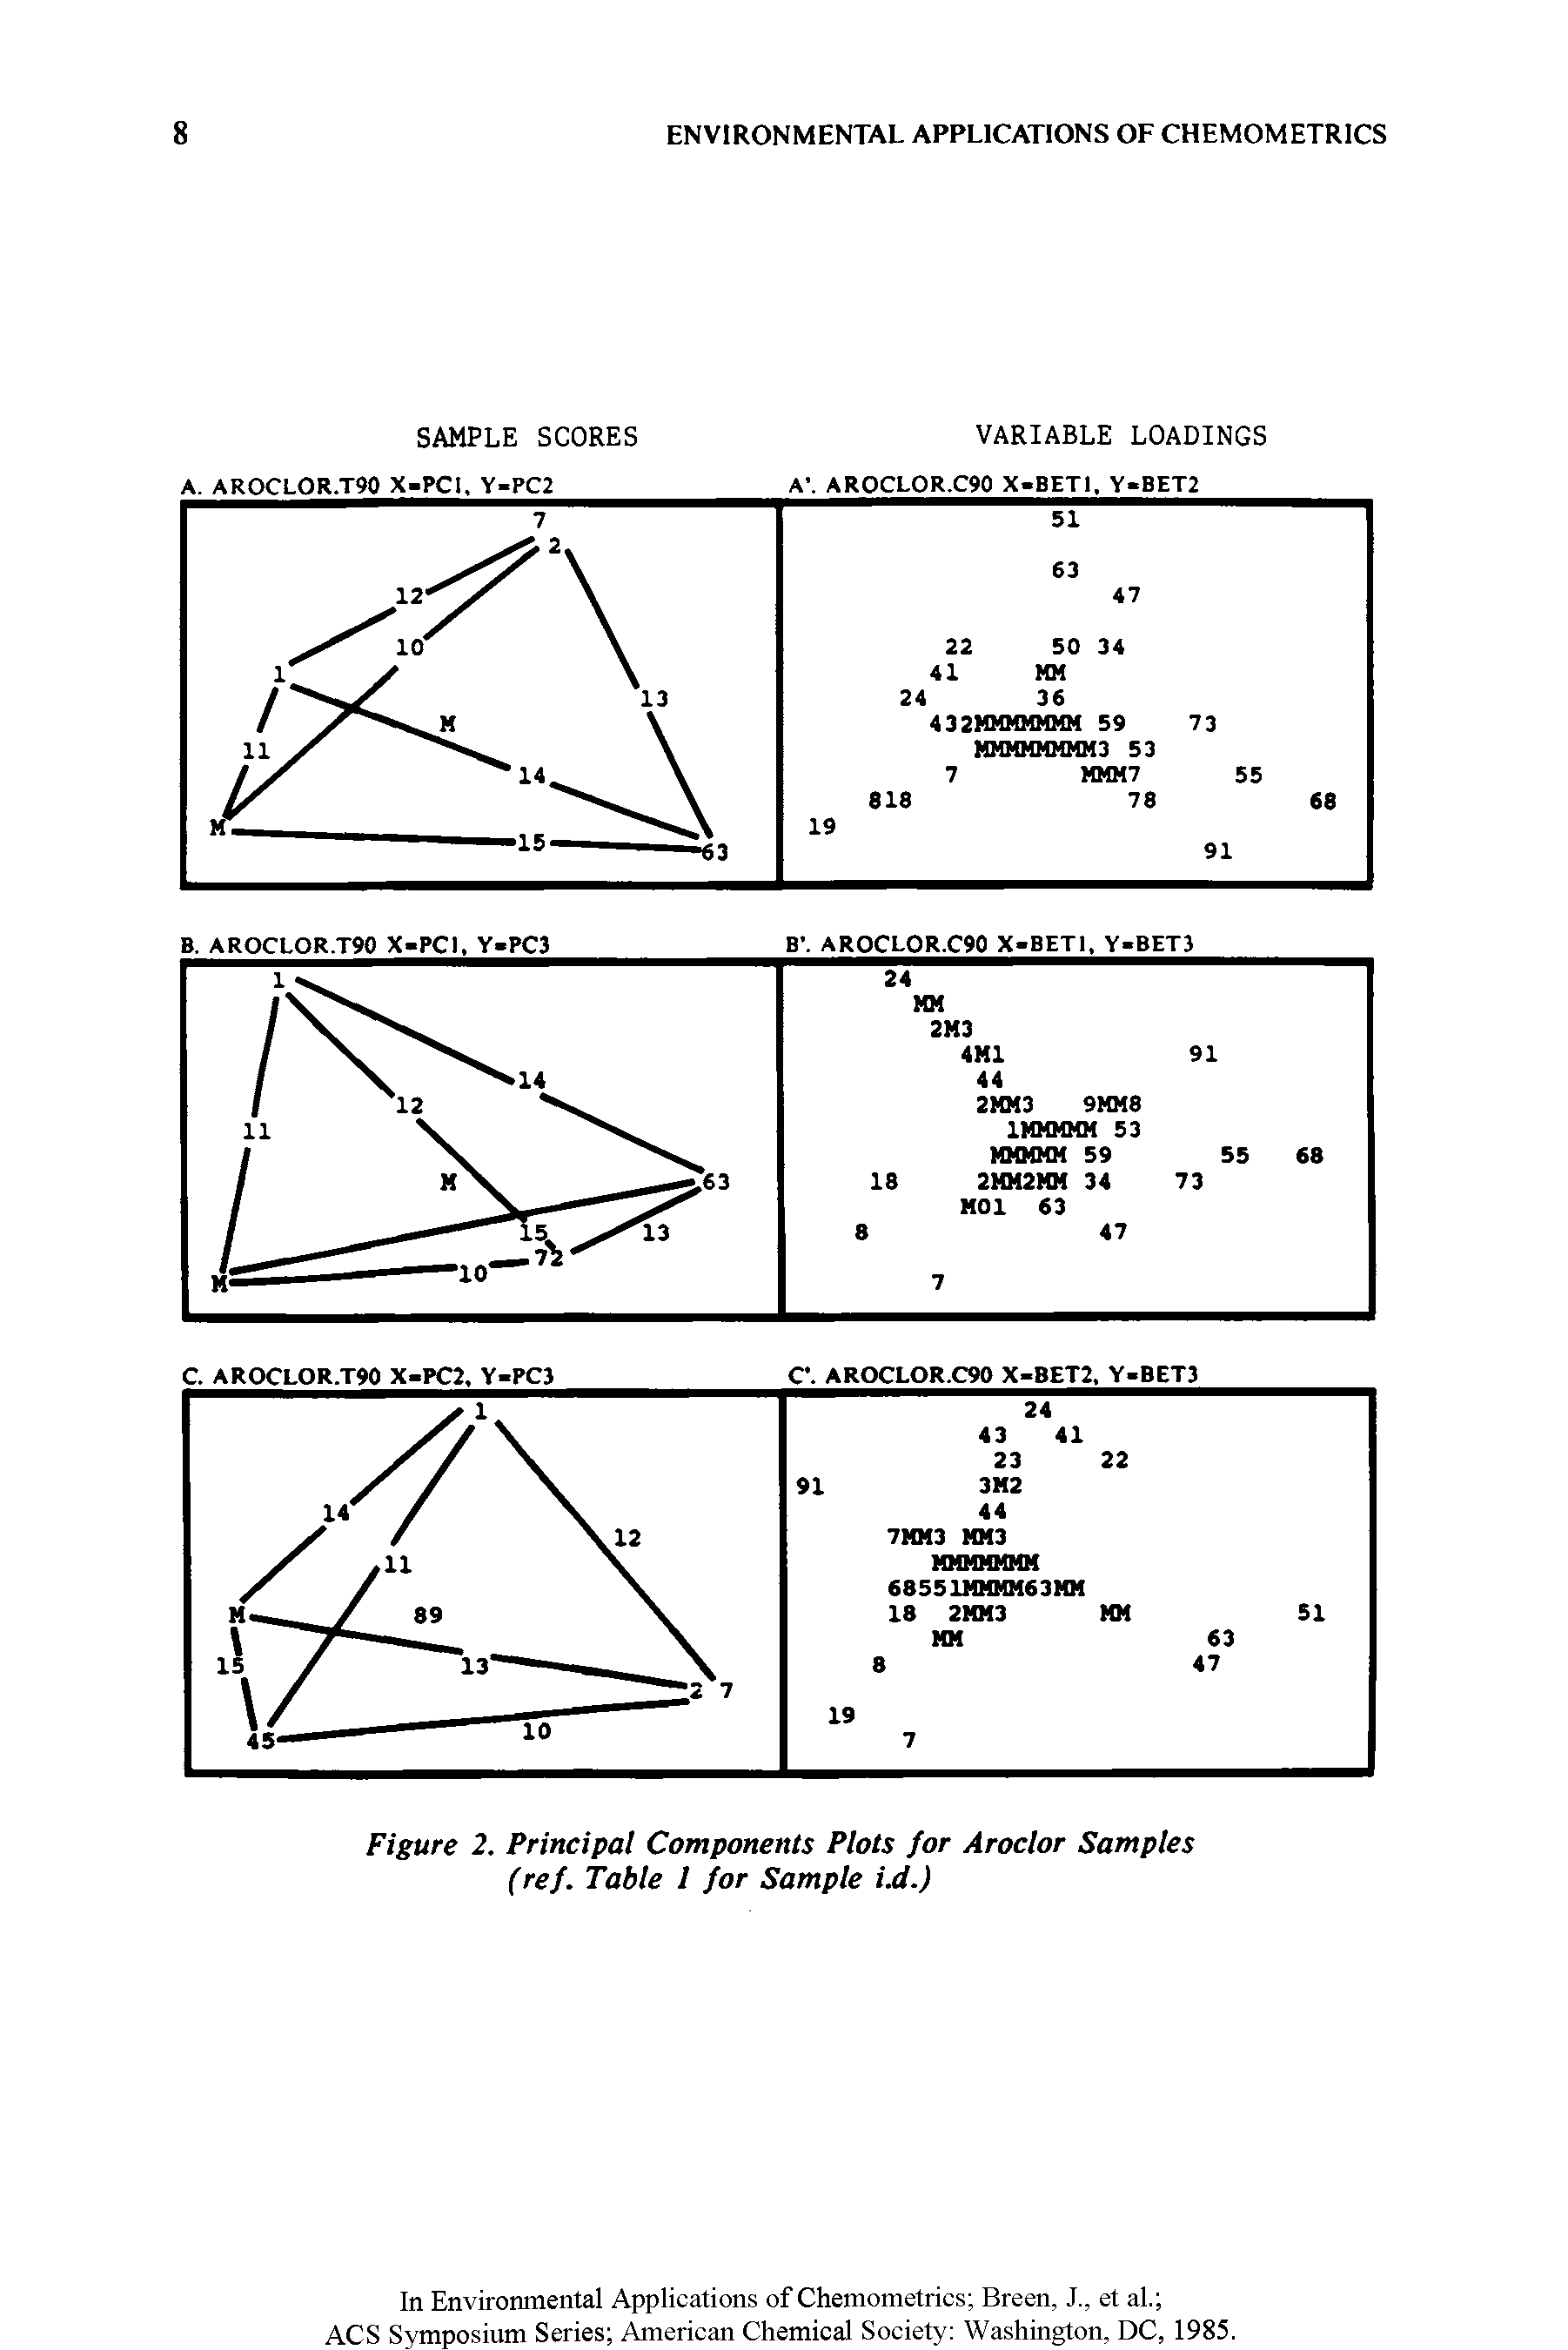 Figure 2. Principal Components Plots for Aroclor Samples (ref. Table I for Sample i.d.)...